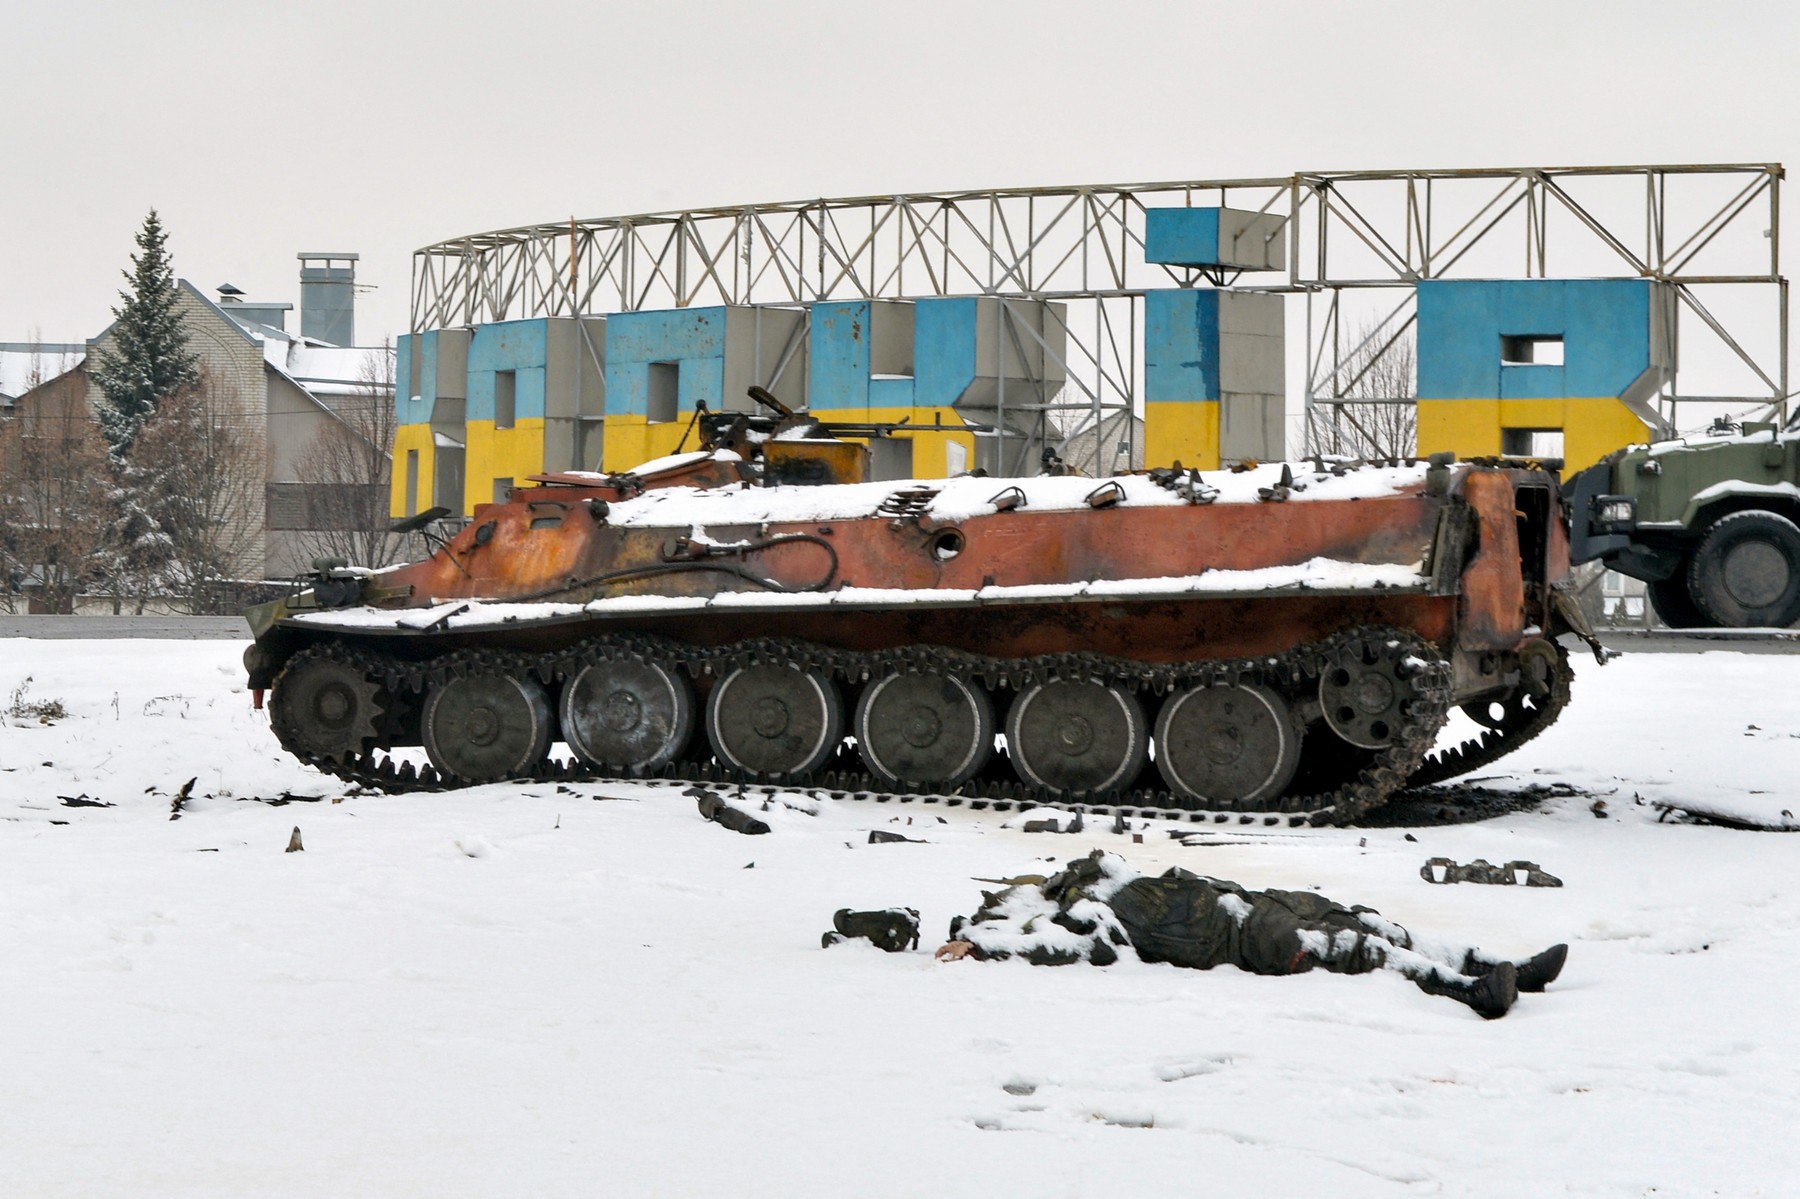 The body of a Russian serviceman lies near destroyed Russian military vehicles on the roadside on the outskirts of Kharkiv on February 26, 2022, following the Russian invasion of Ukraine. Ukrainian forces repulsed a Russian attack on Kyiv but 